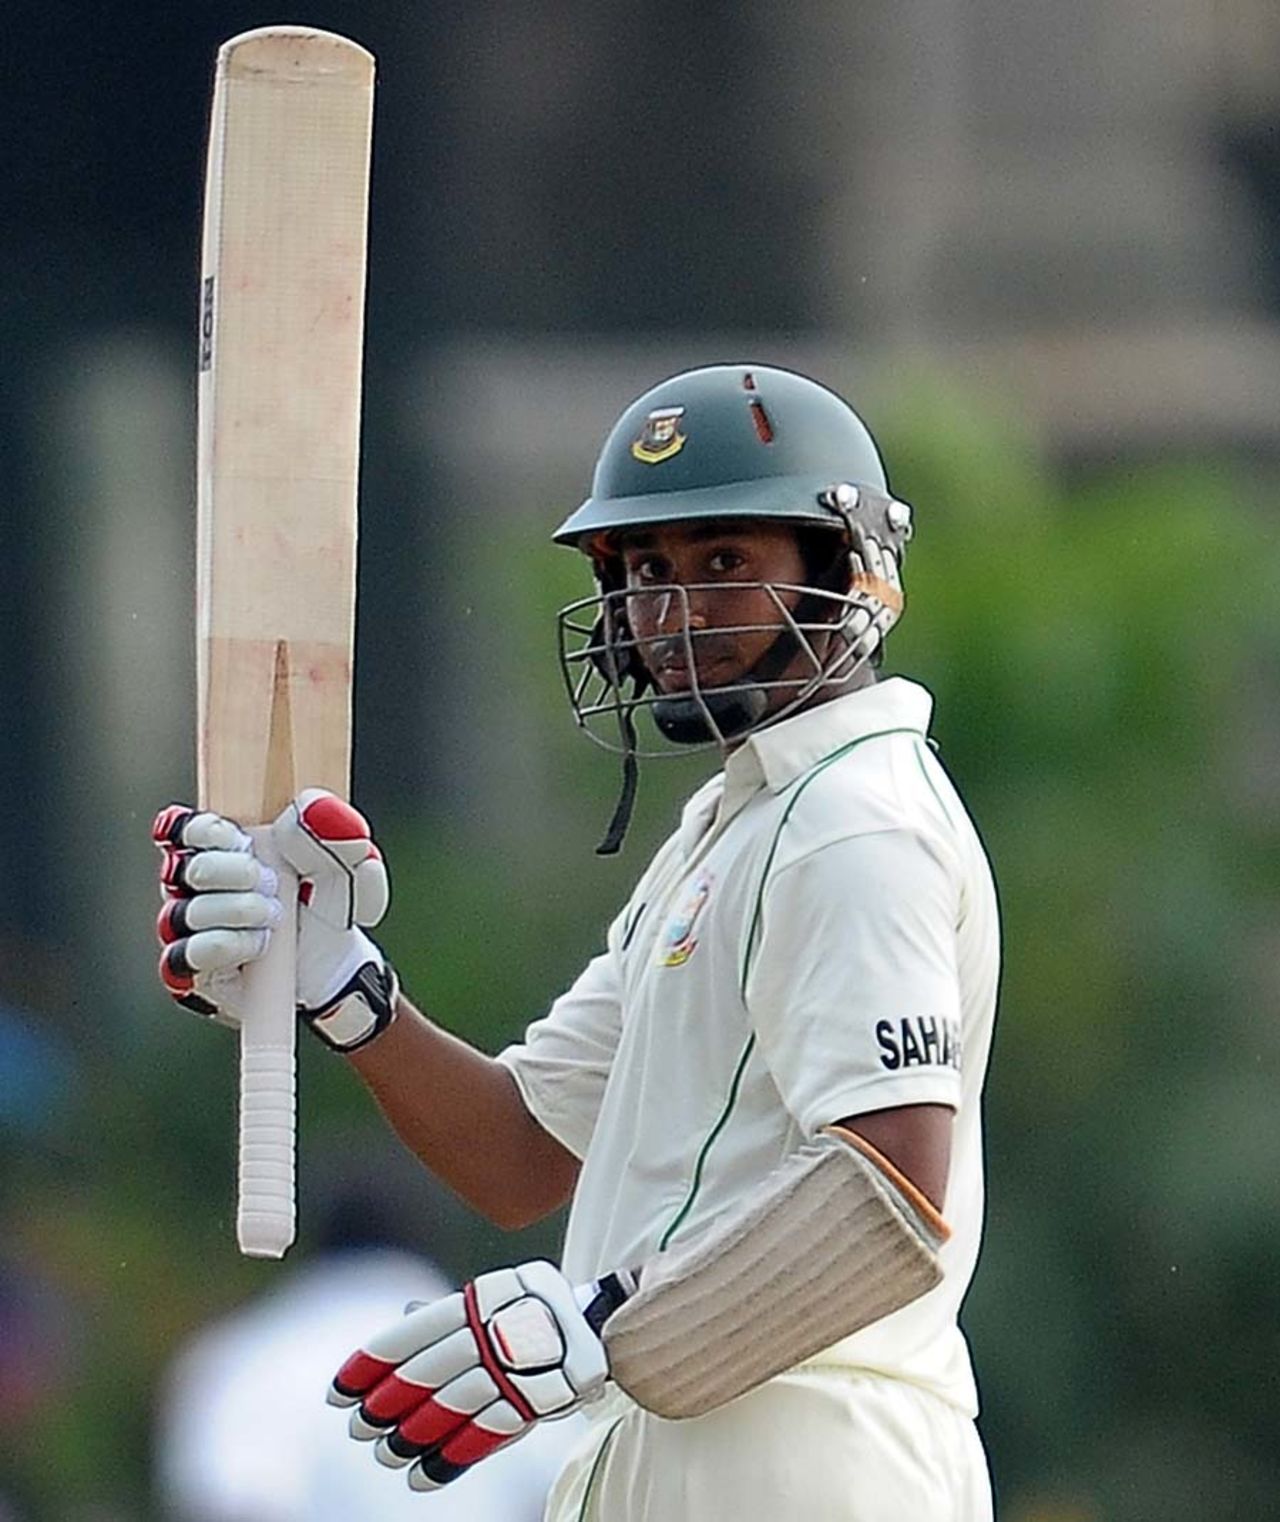 Mohammad Ashraful raises his bat after scoring a fifty, Sri Lanka v Bangladesh, 1st Test, Galle, 2nd day, March 9, 2013